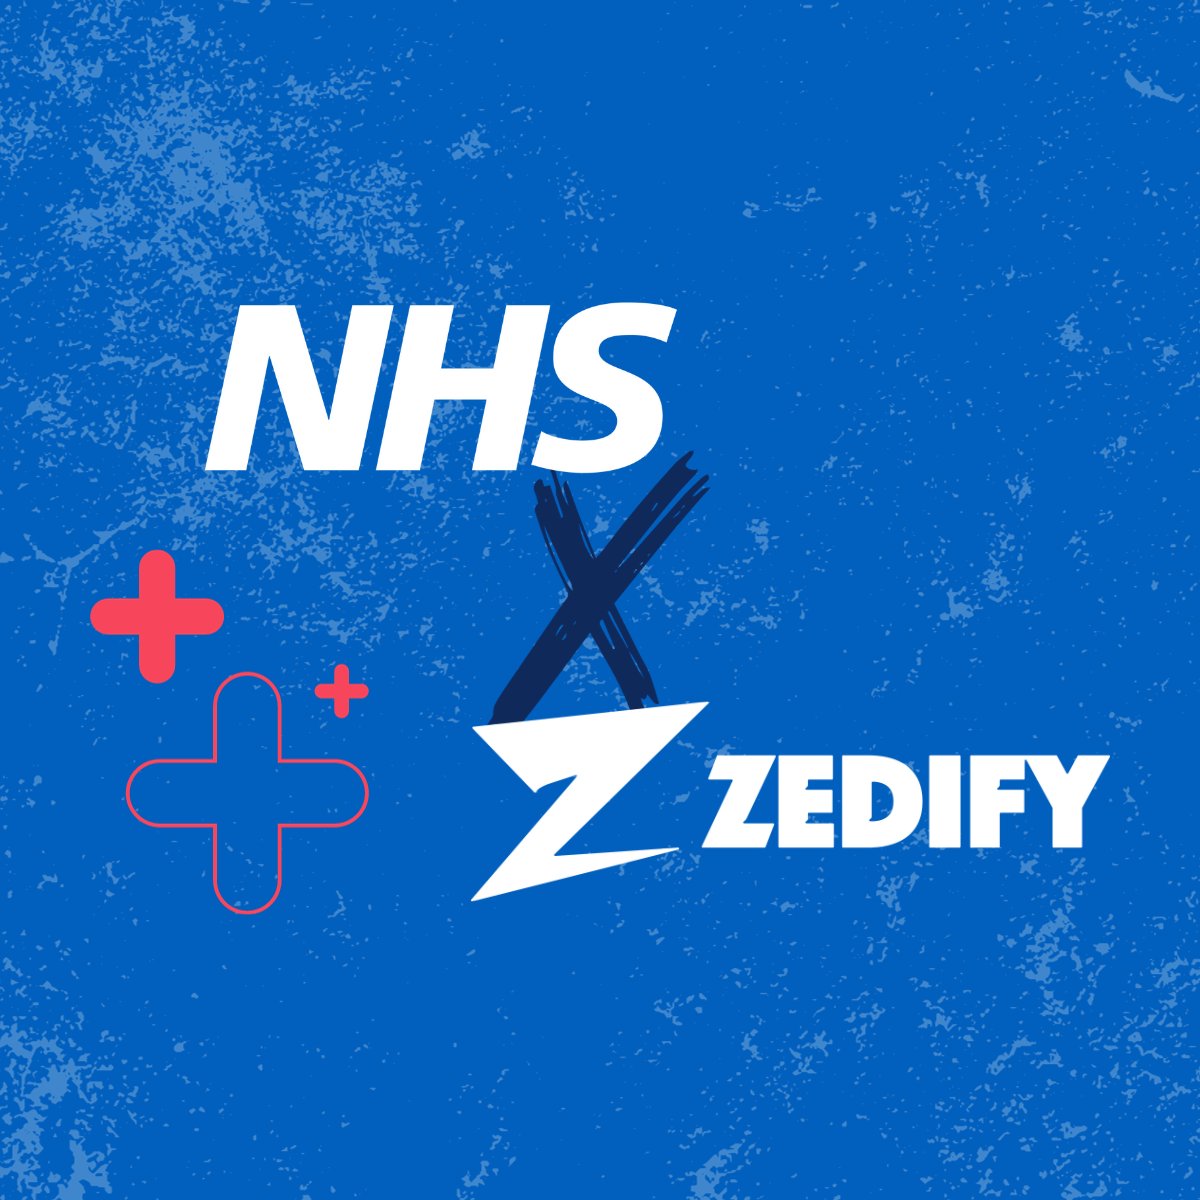 The NHS x Zedify 🏥 We're so pleased to announce that Zedify is an official logistics provider on the NHS Framework Agreement! Here's to seeing a lot more cargo bikes around your local hospital, school, or charity 🏥 eu1.hubs.ly/H06p-G40